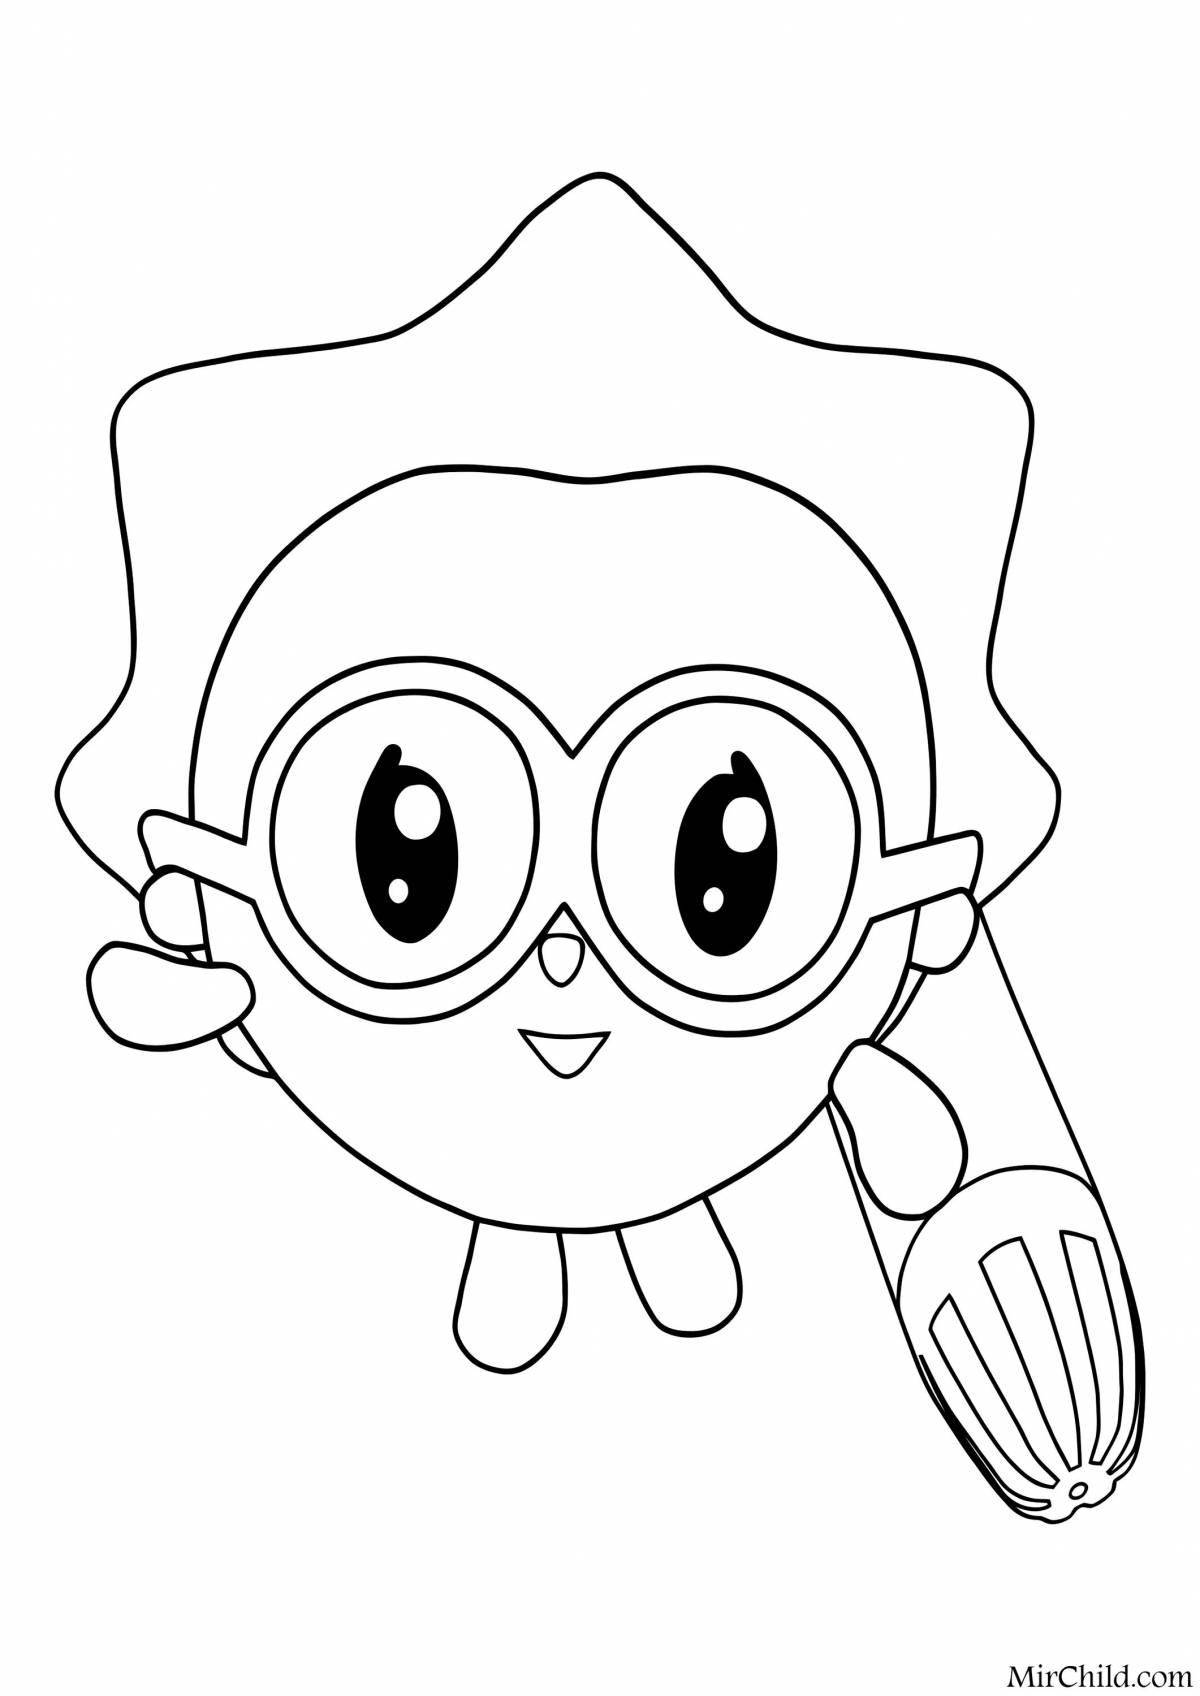 Cute kids coloring pages